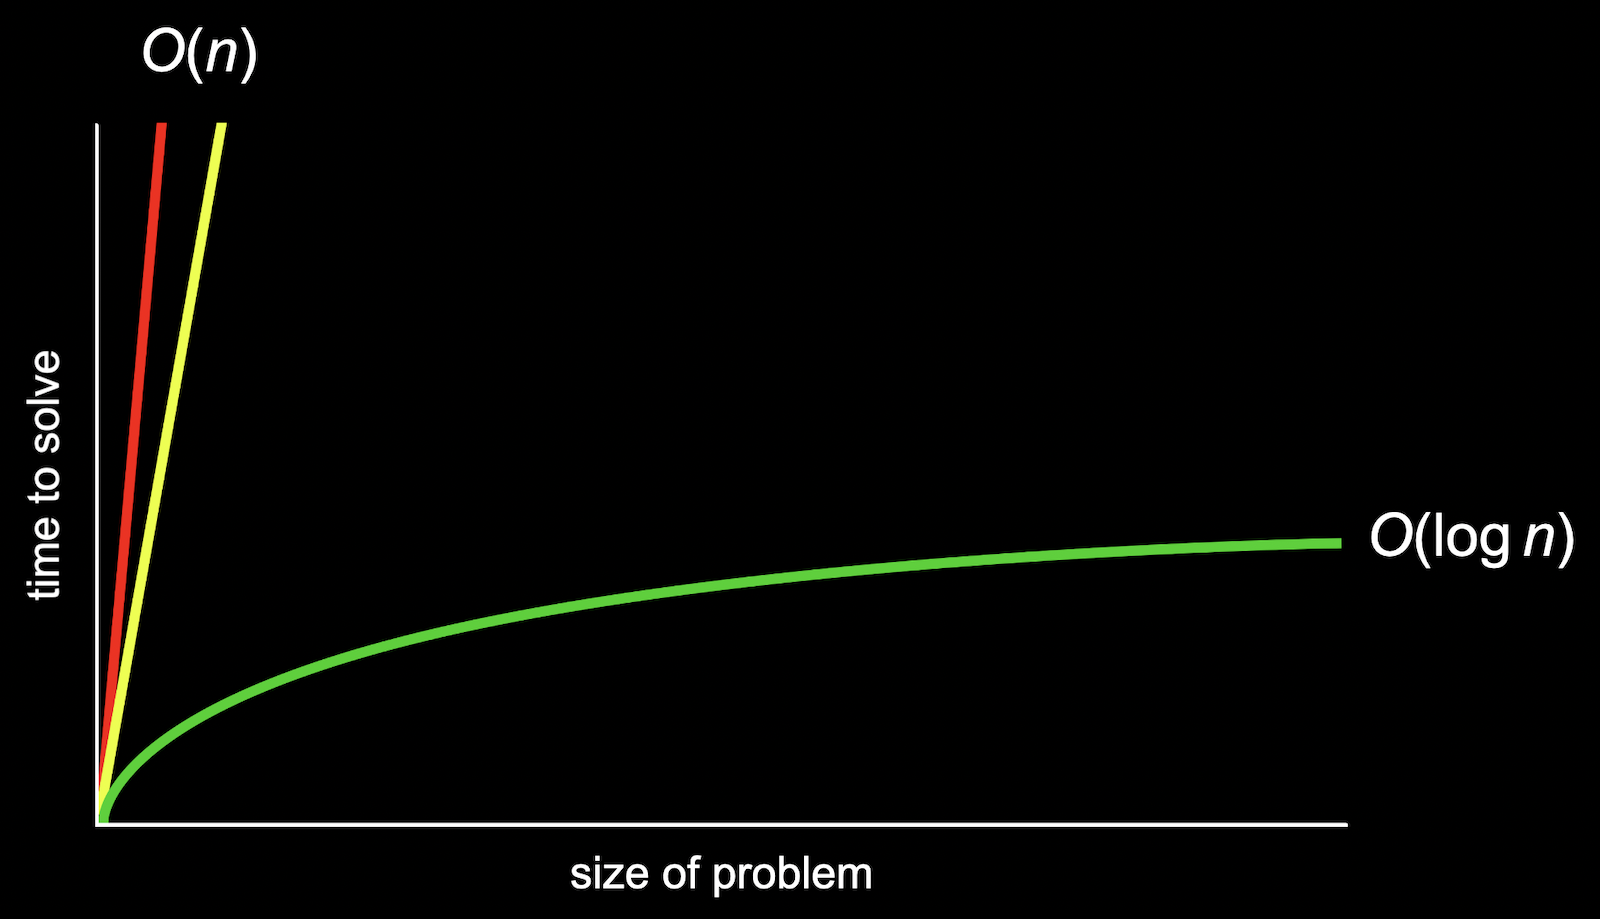 chart with: "size of problem" as x-axis; "time to solve" as y-axis; red, steep straight line from origin to top of graph close to yellow, less steep straight line from origin to top of graph both labeled "O(n)"; green, curved line that gets less and less steep from origin to right of graph labeled "O(log n)"